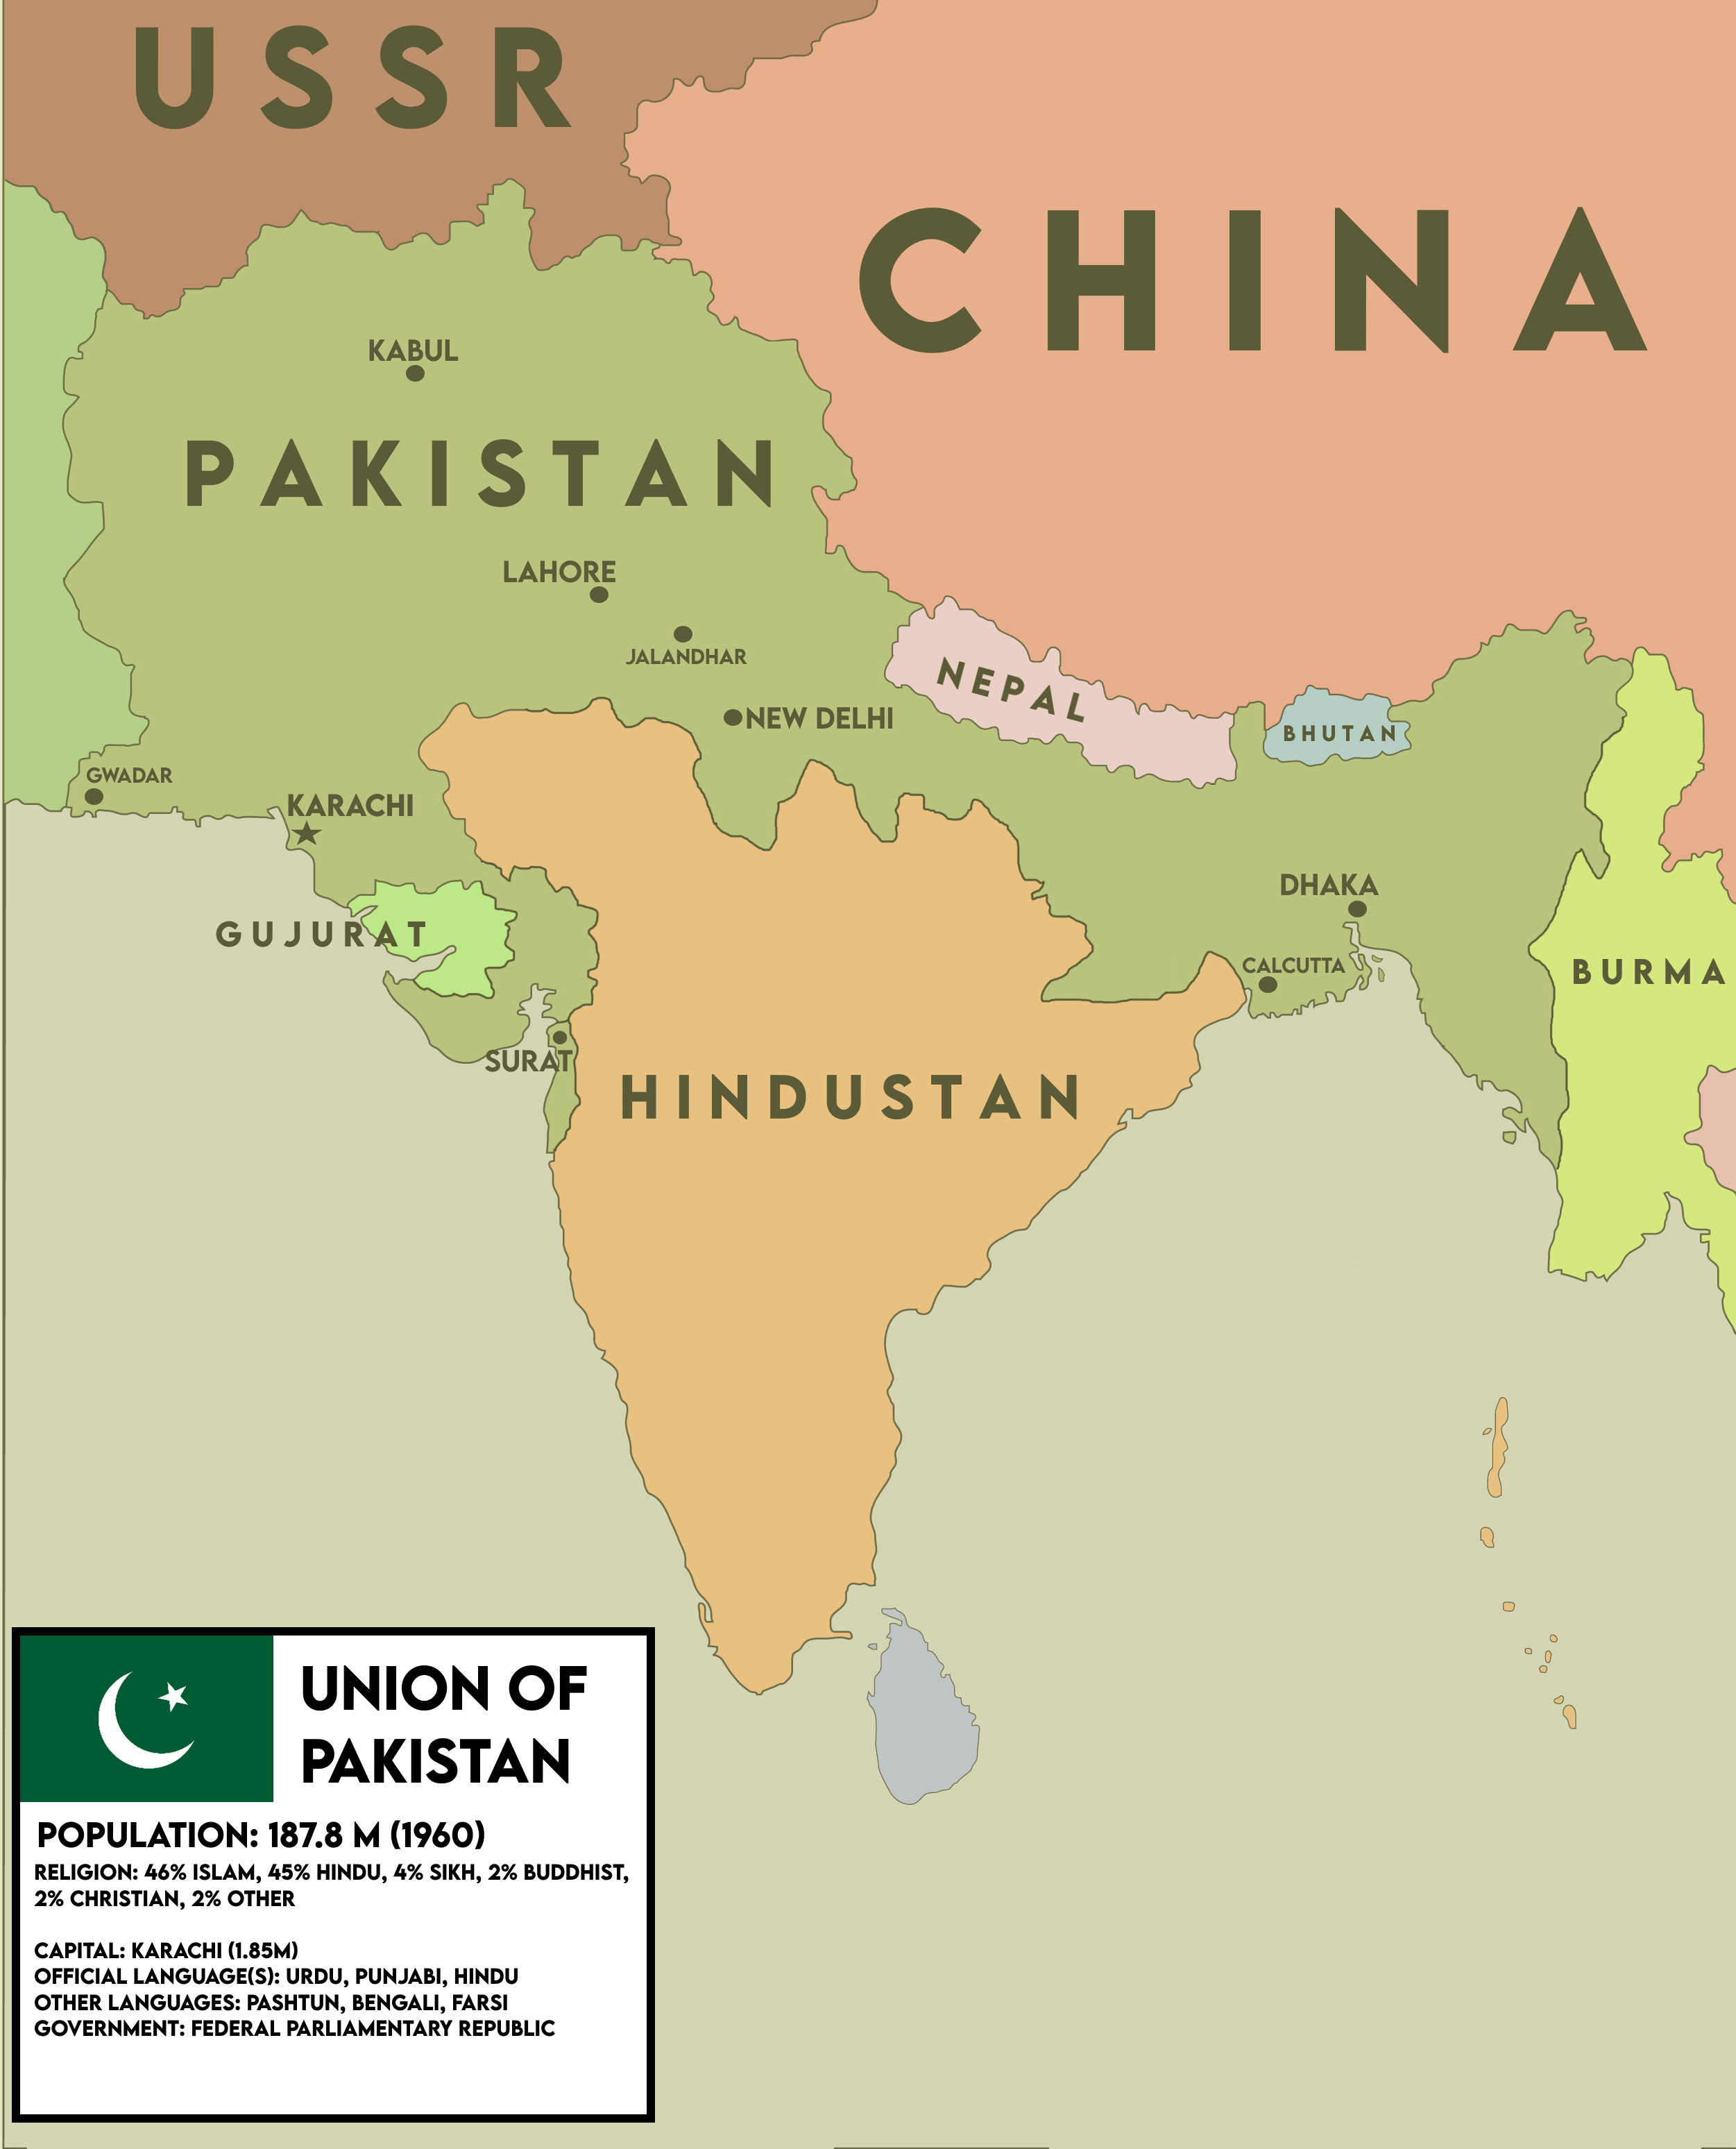 what-if-pakistan-was-bigger-map-of-pakistan-and-south-asia-v0-ldxxfxc5pnq91.png